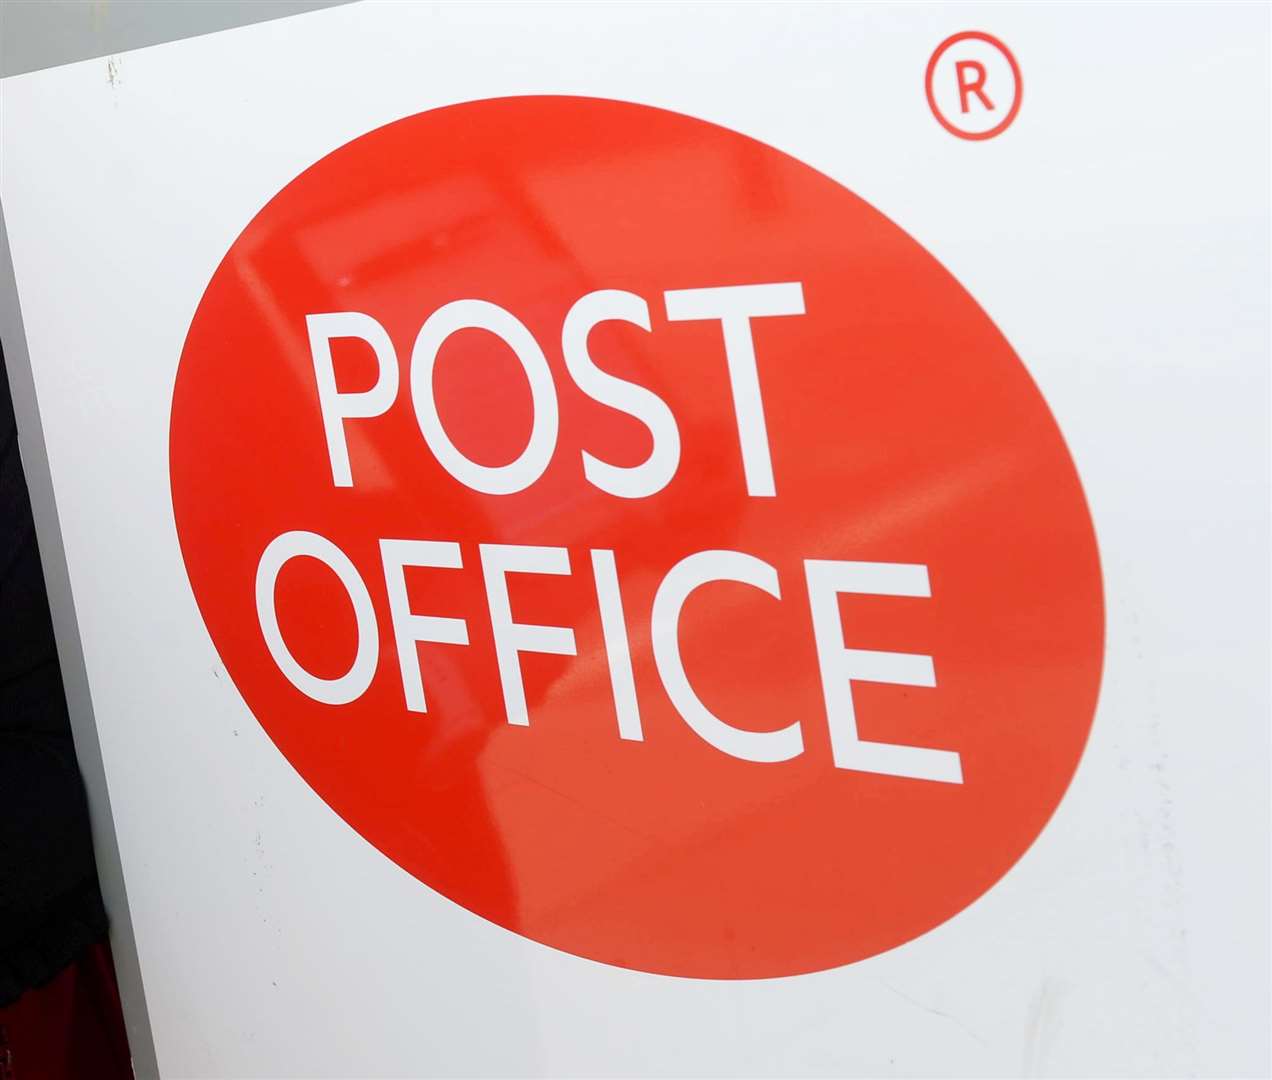 Brora Post Office is moving temporarily to new premises.